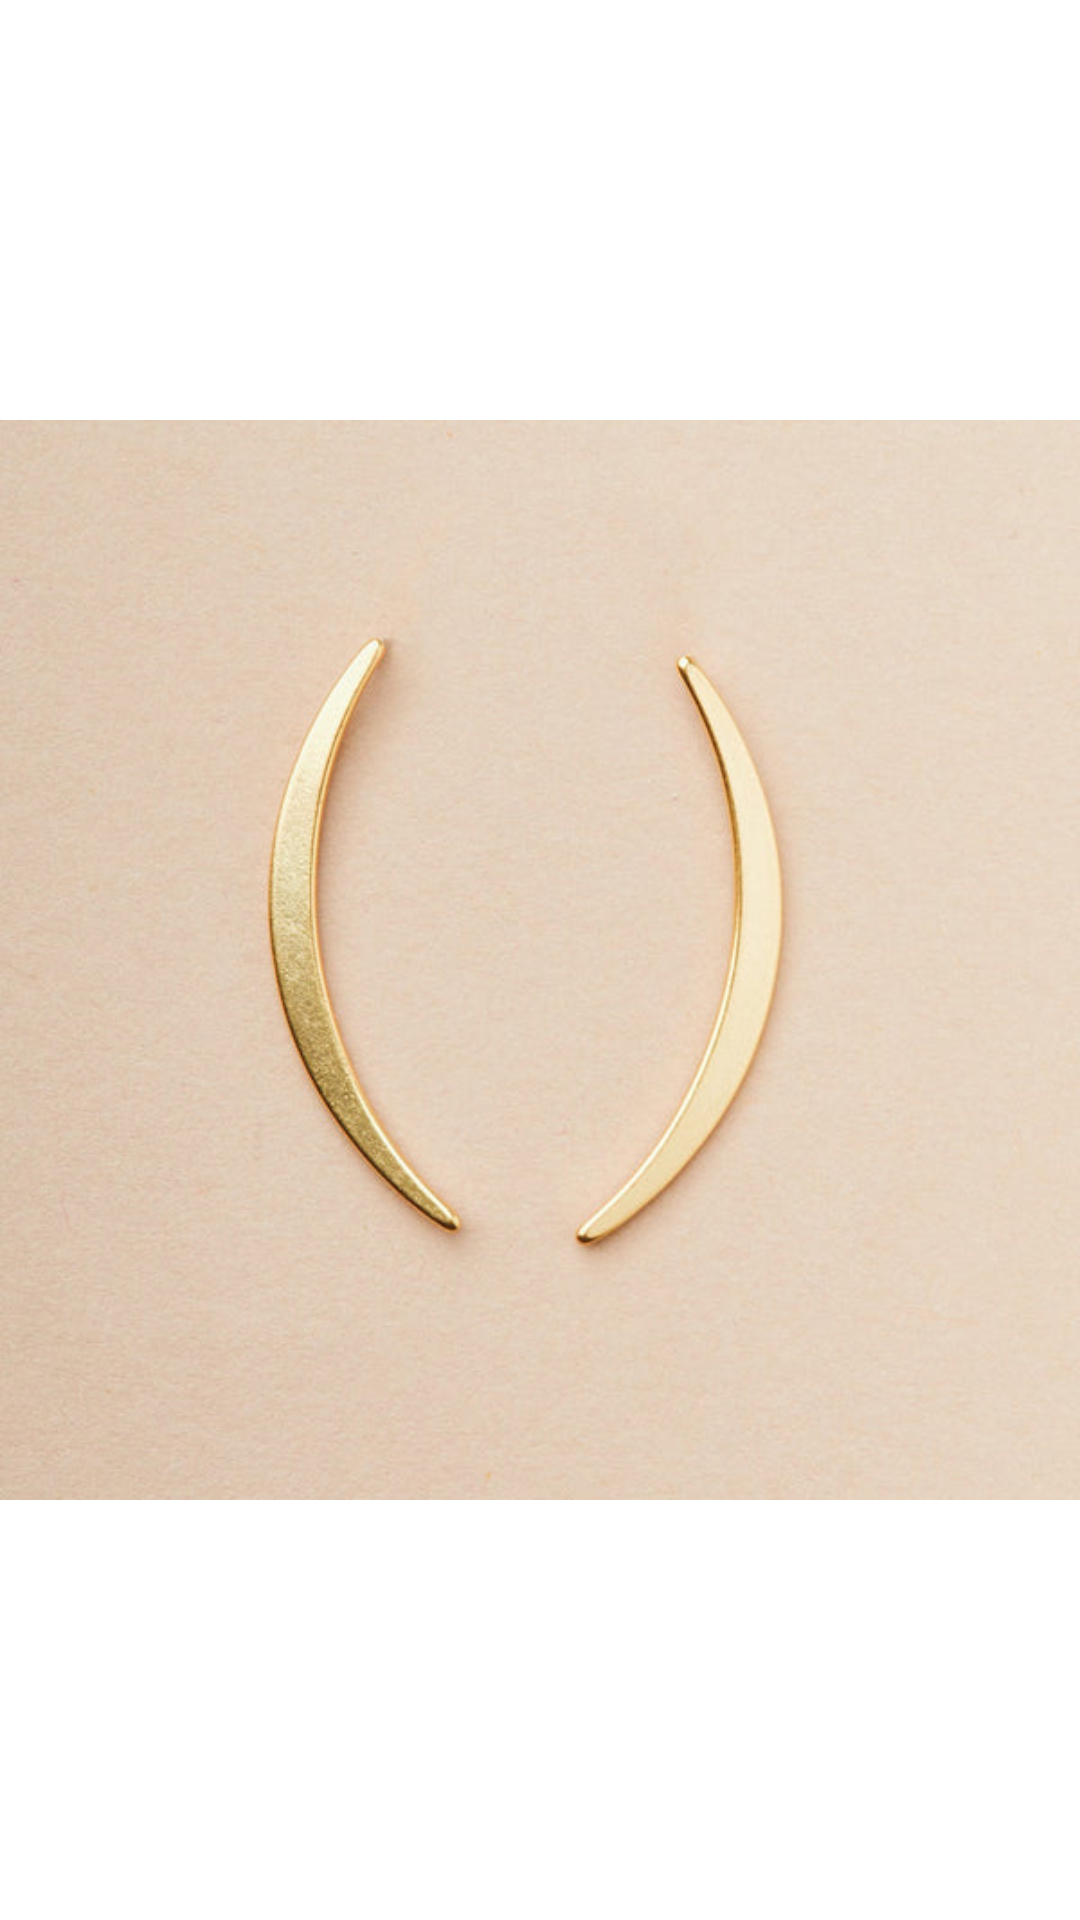 Refined Earring Collection - Gibbous Slice Stud/Gold Vermeil